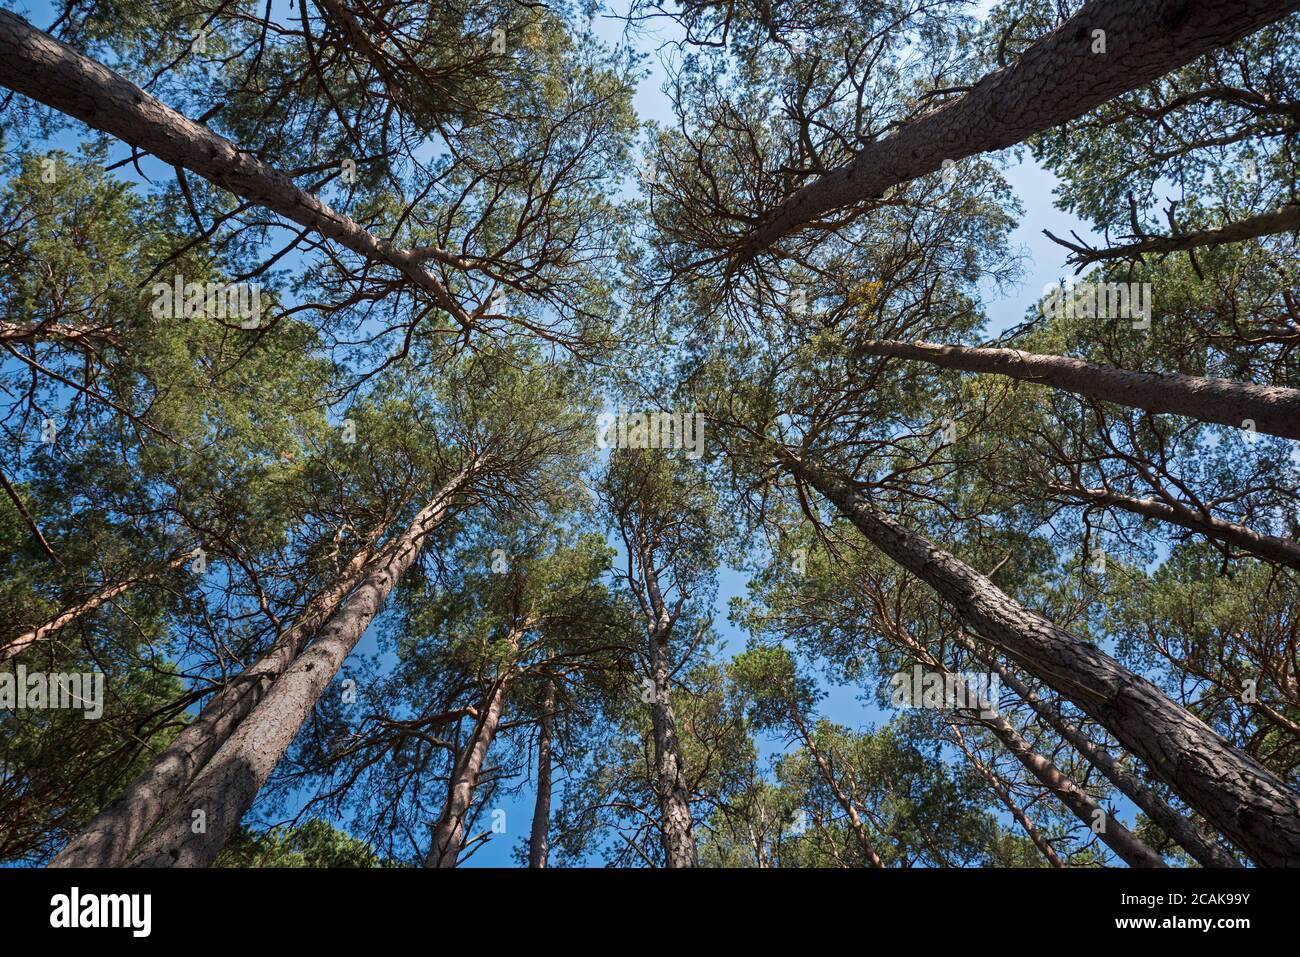 Looking up to the sky through pine trees near Aviemore in the Cairngorms National Park, Scotland, UK. Stock Photo